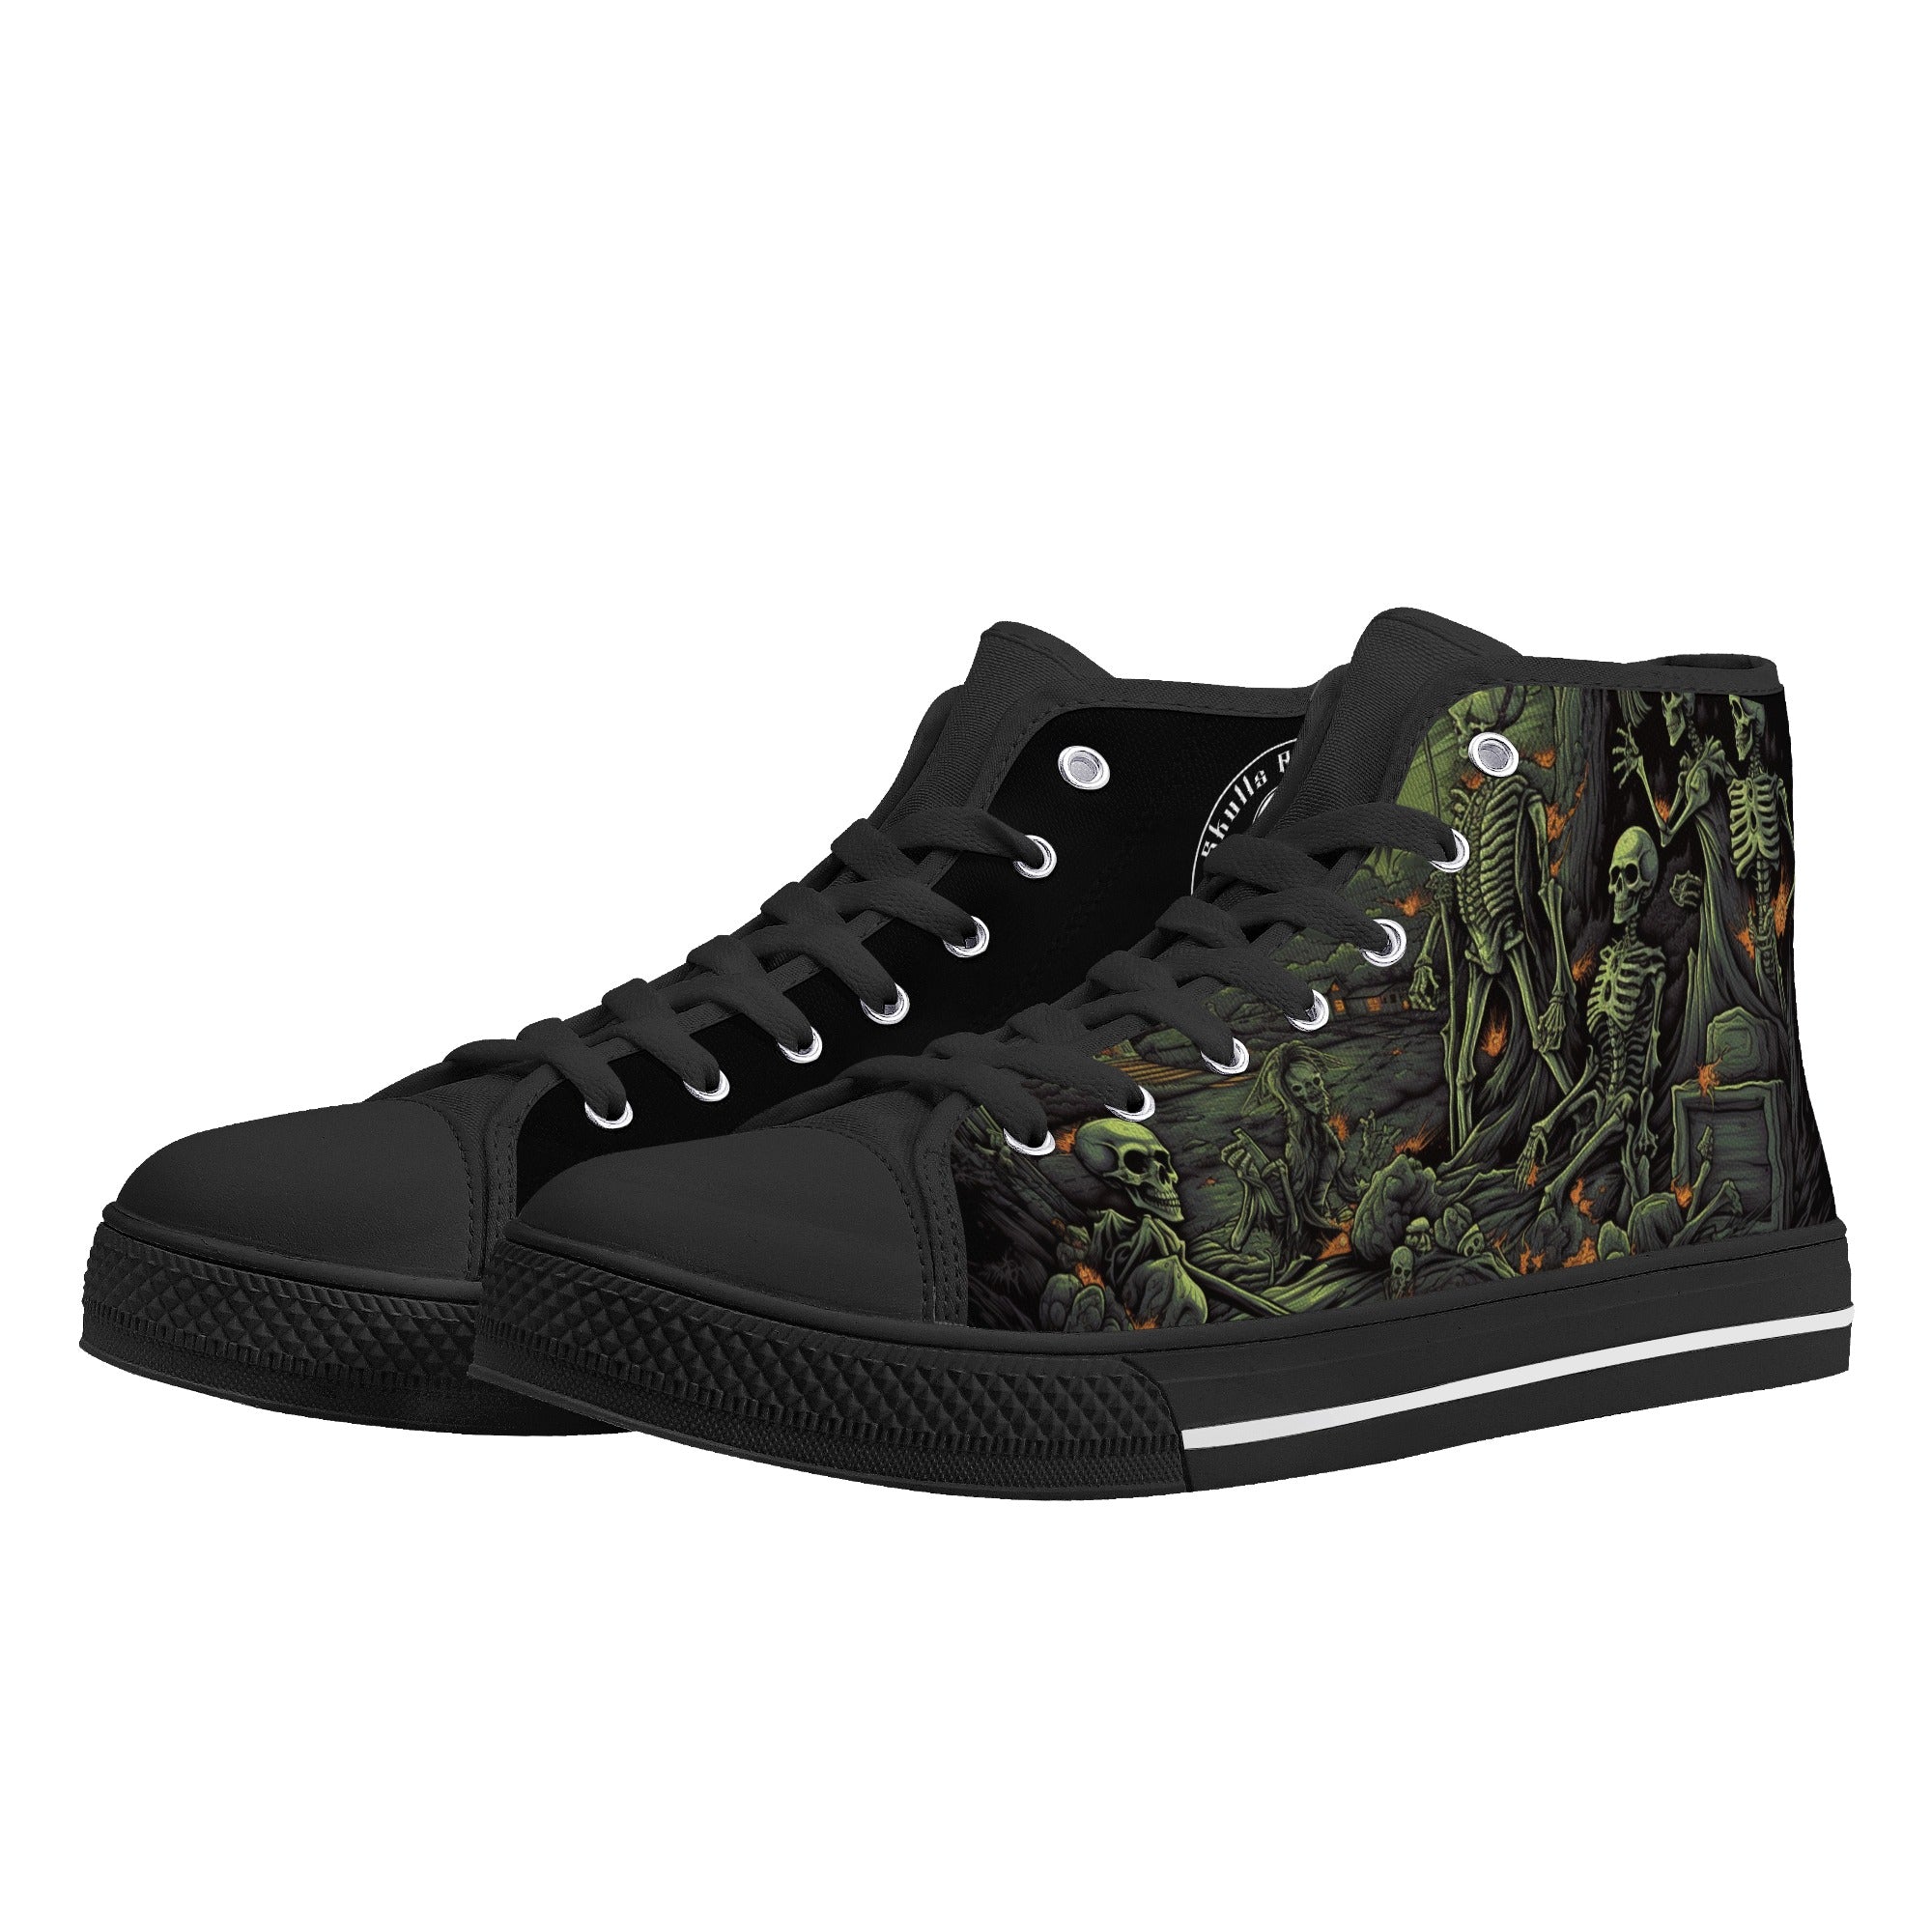 Creepy Green Skeletons Men's Psychobilly High Top Shoes